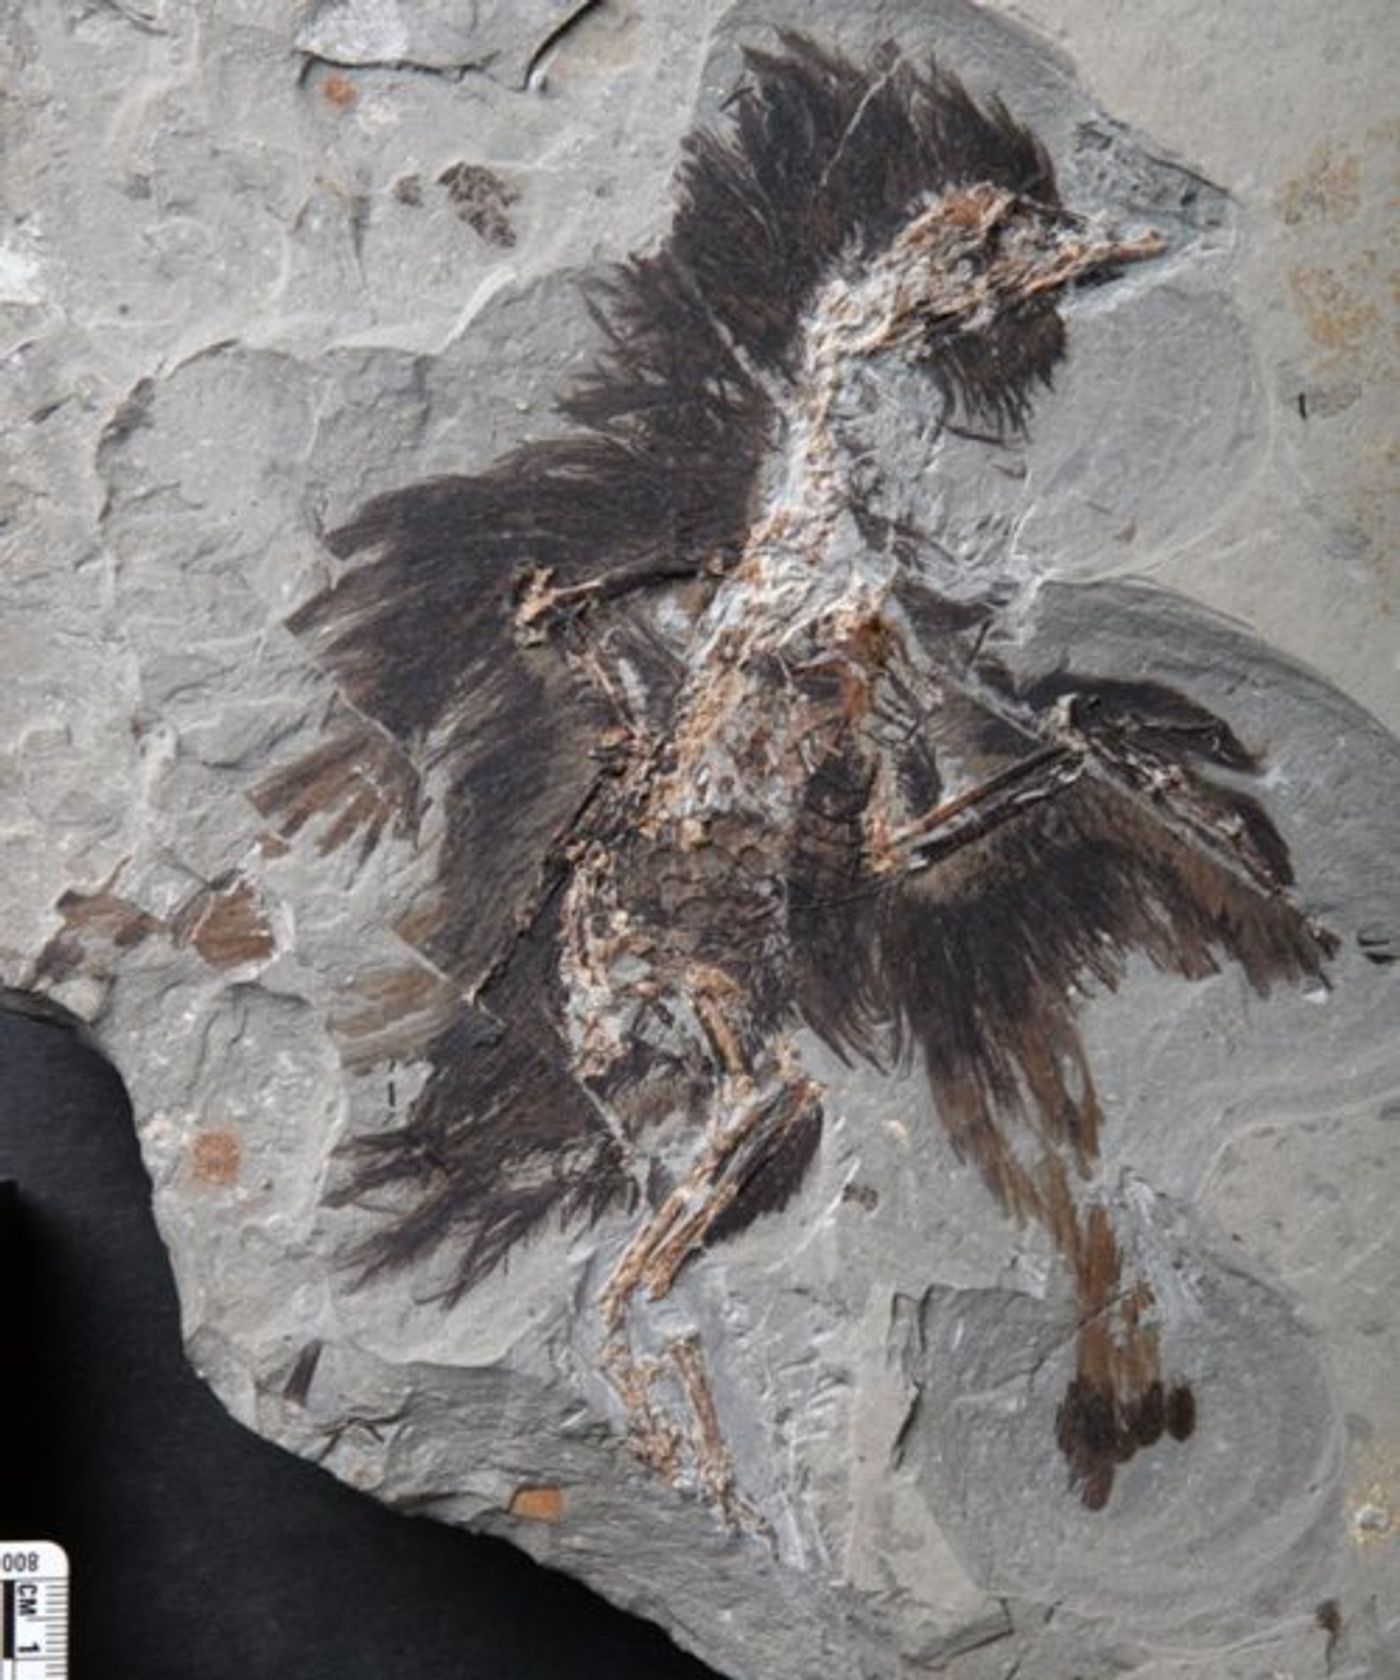 An eoconfuciusornis fossil, well preserved.